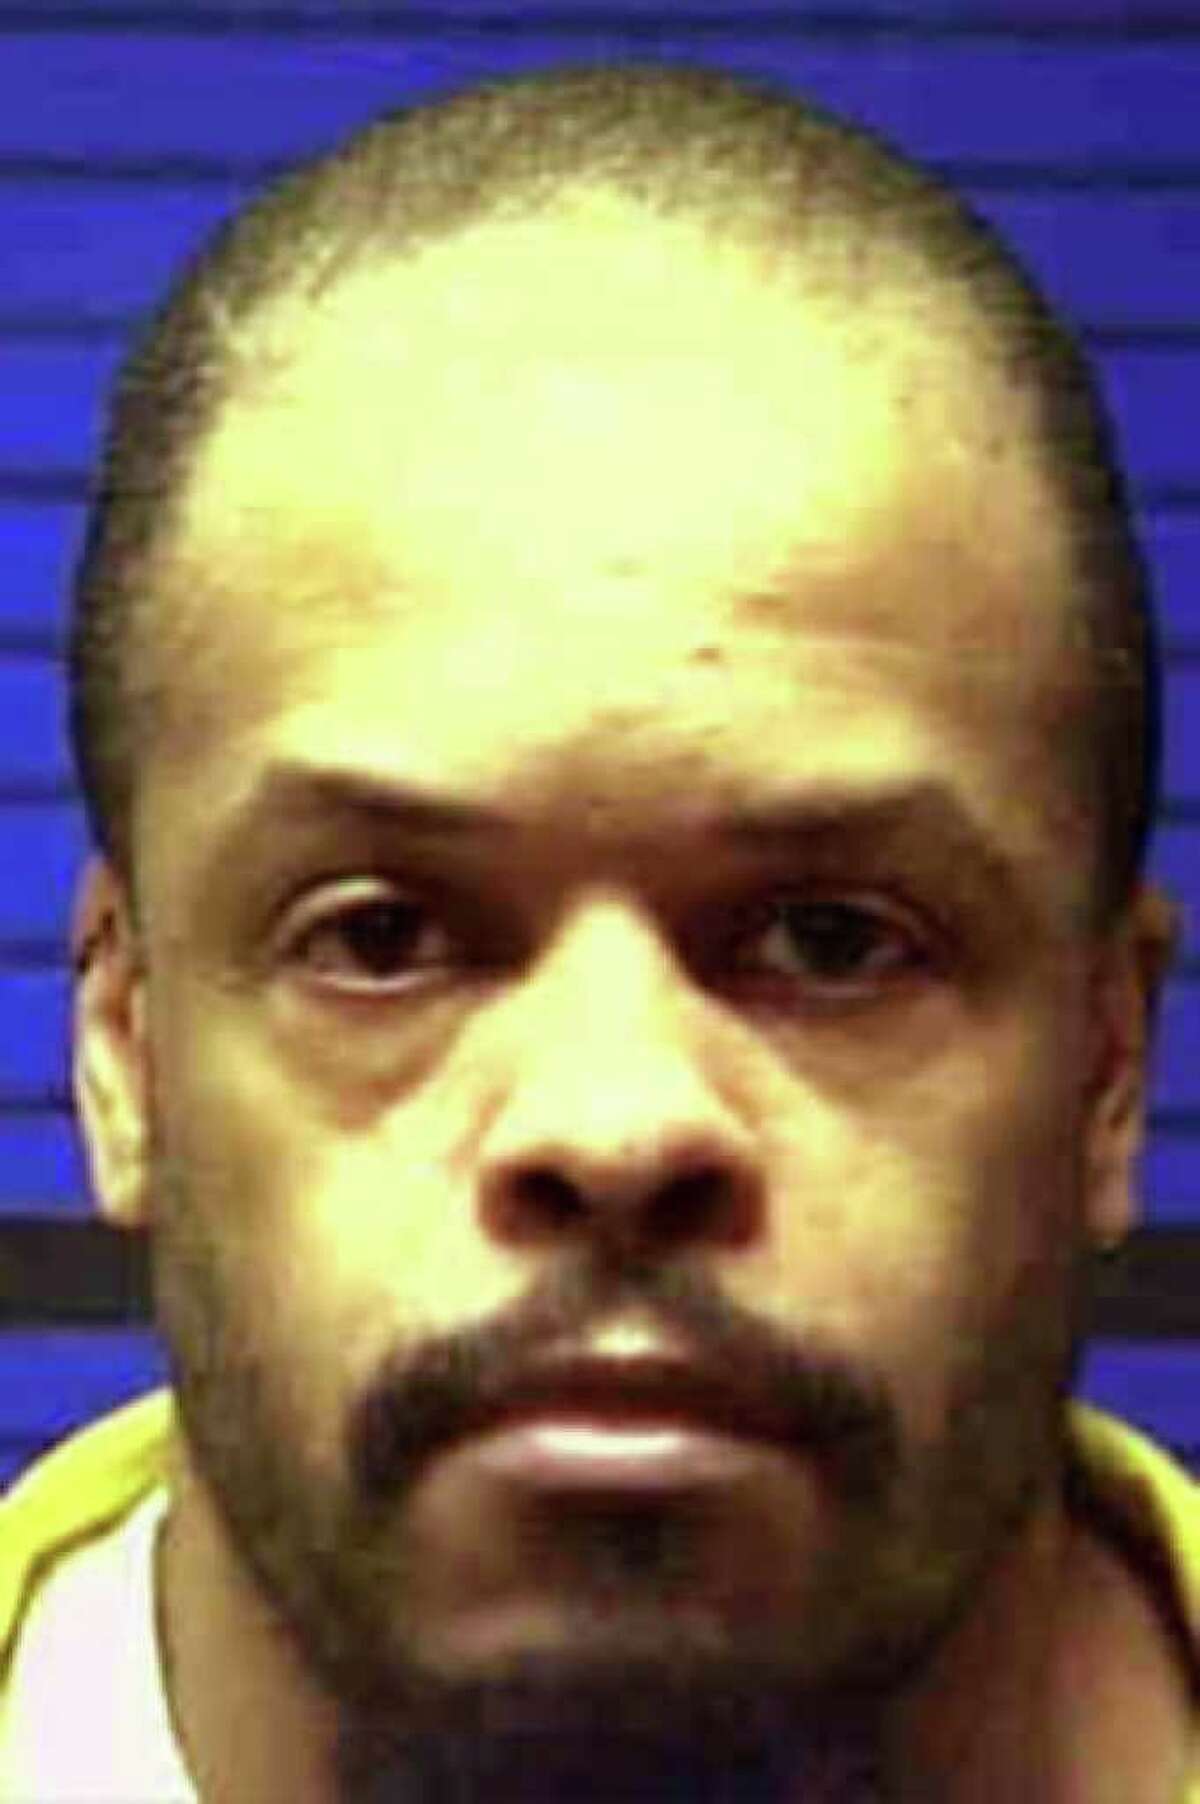 Sedrick "Ricky" Cobb, age 46, a former delivery man from Naugatuck, was convicted of capital felony, kidnapping, murder, sexual assault and robbery in the Dec. 16, 1989, attack on 23-year-old Julia Ashe of Watertown.